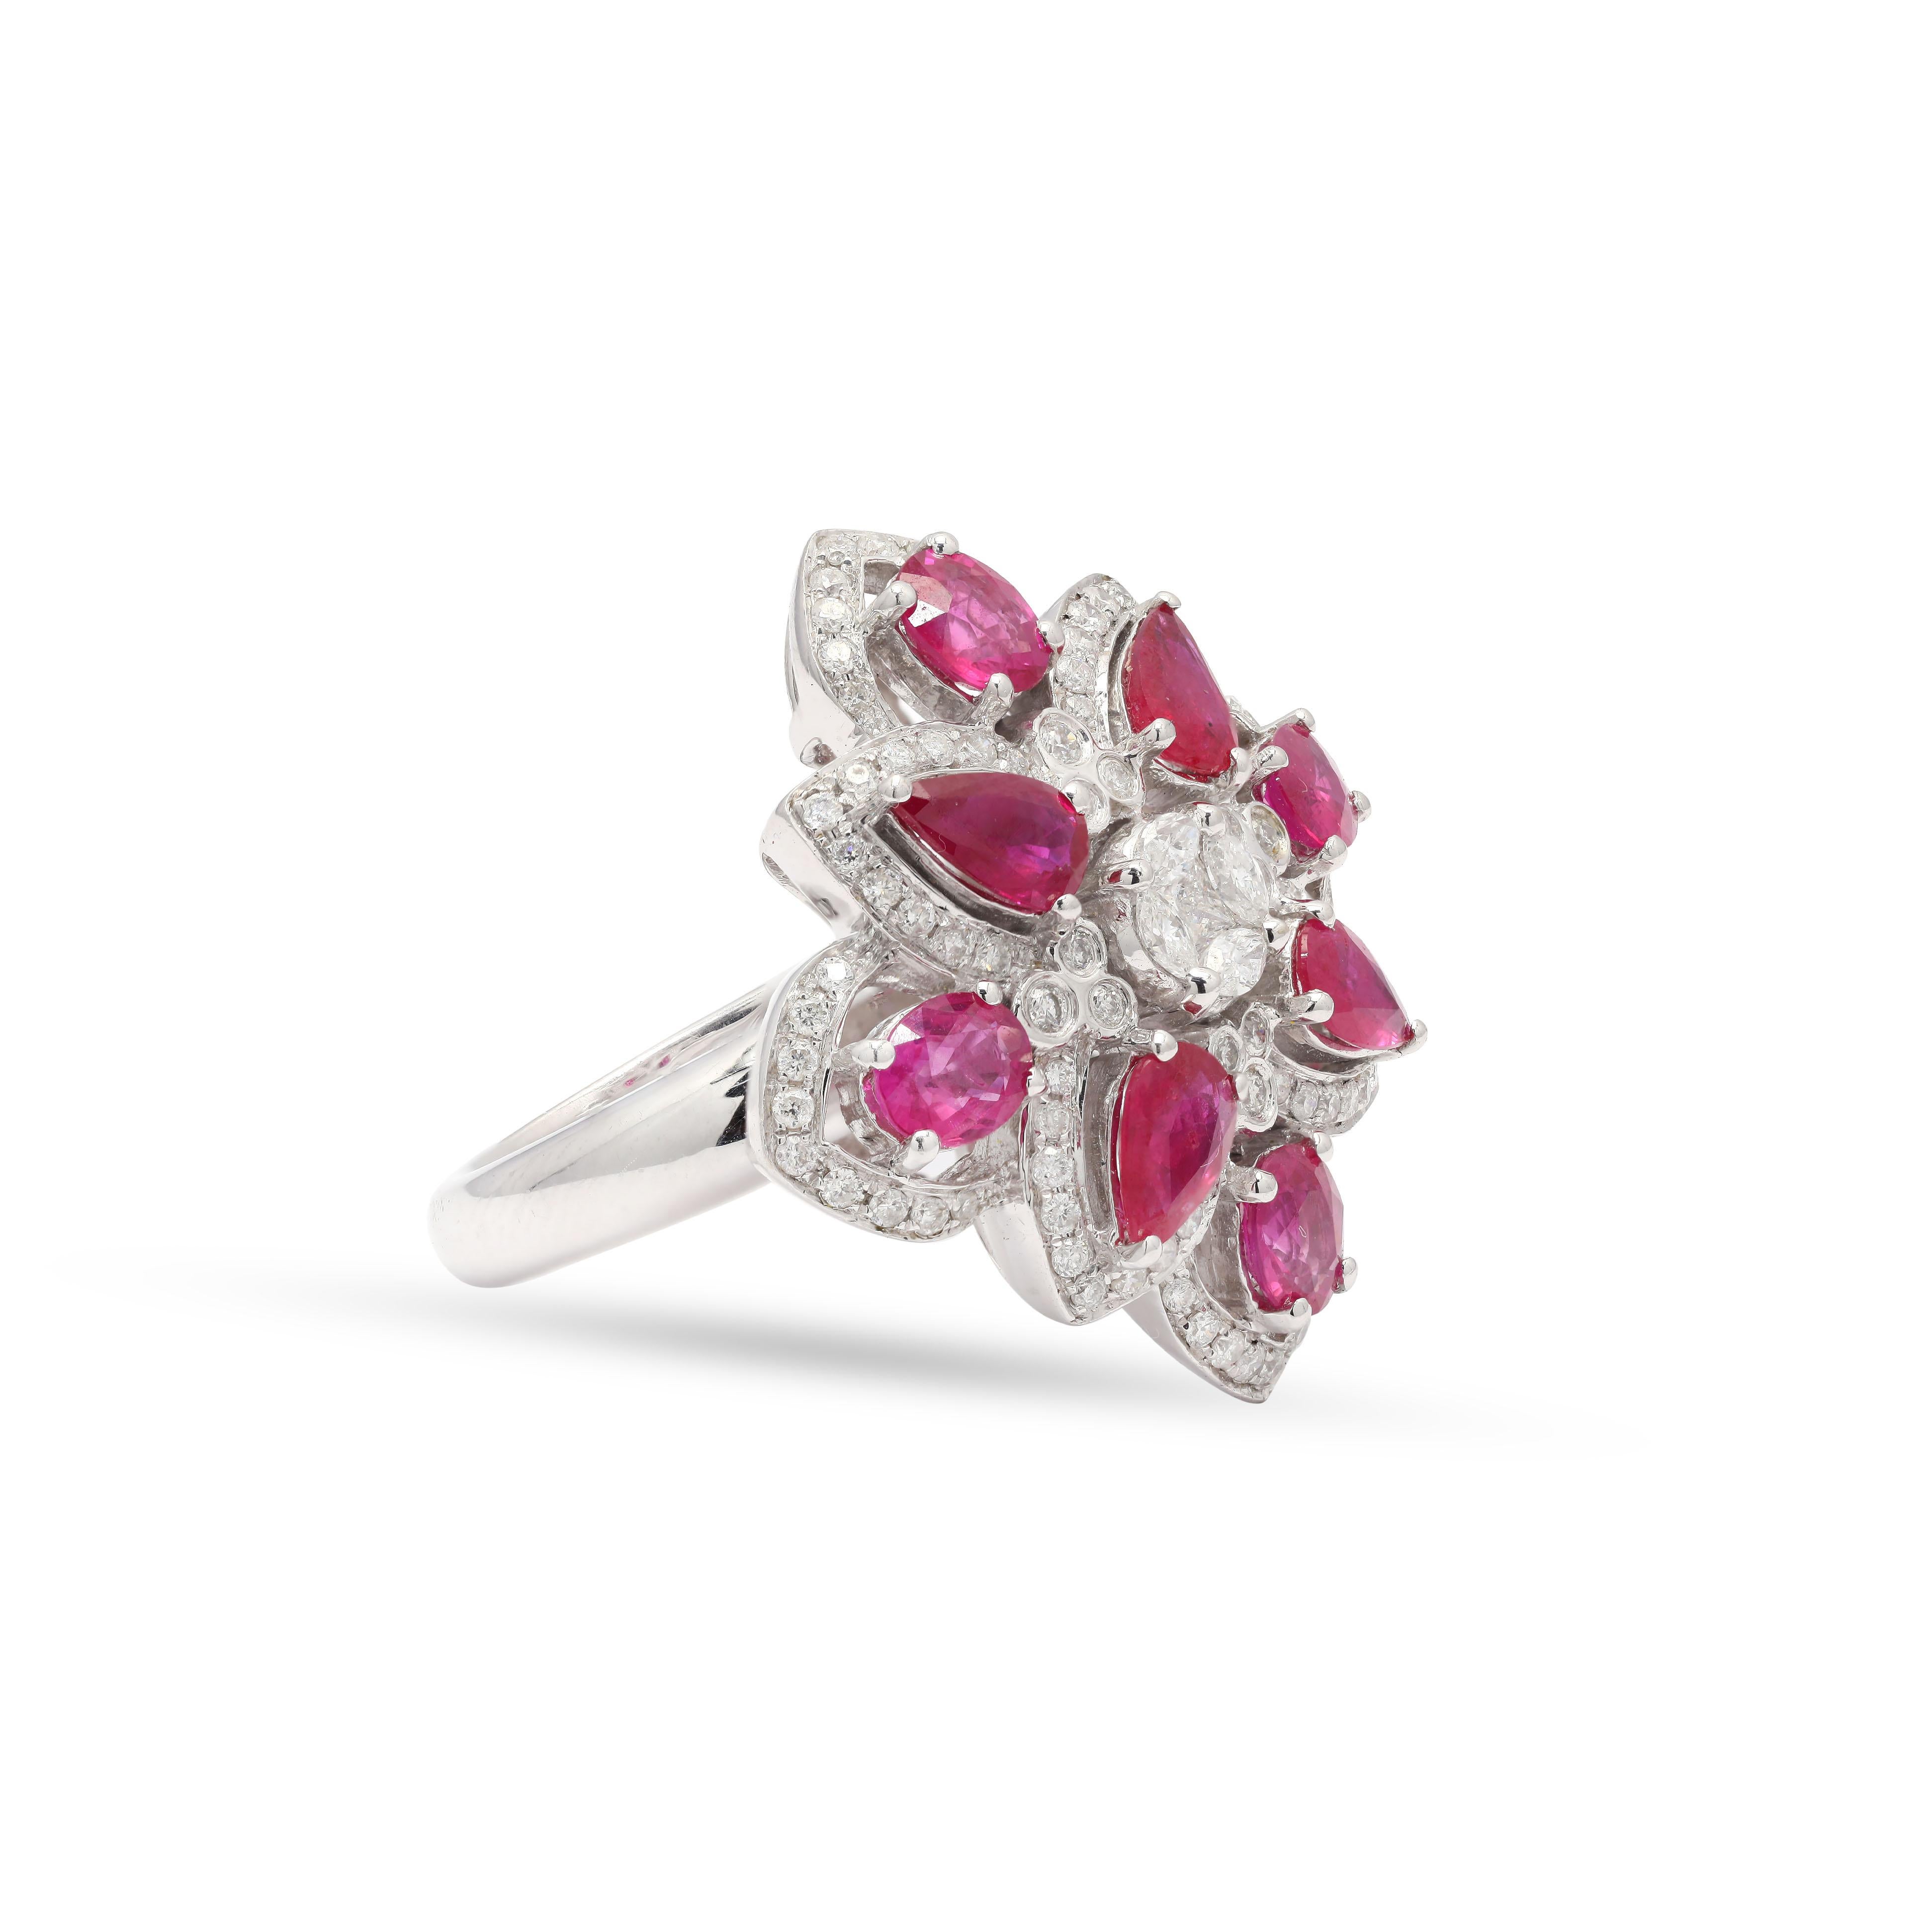 For Sale:  3.45 Carat Ruby and Diamond White Gold Ring in 14 Karat White Gold  3